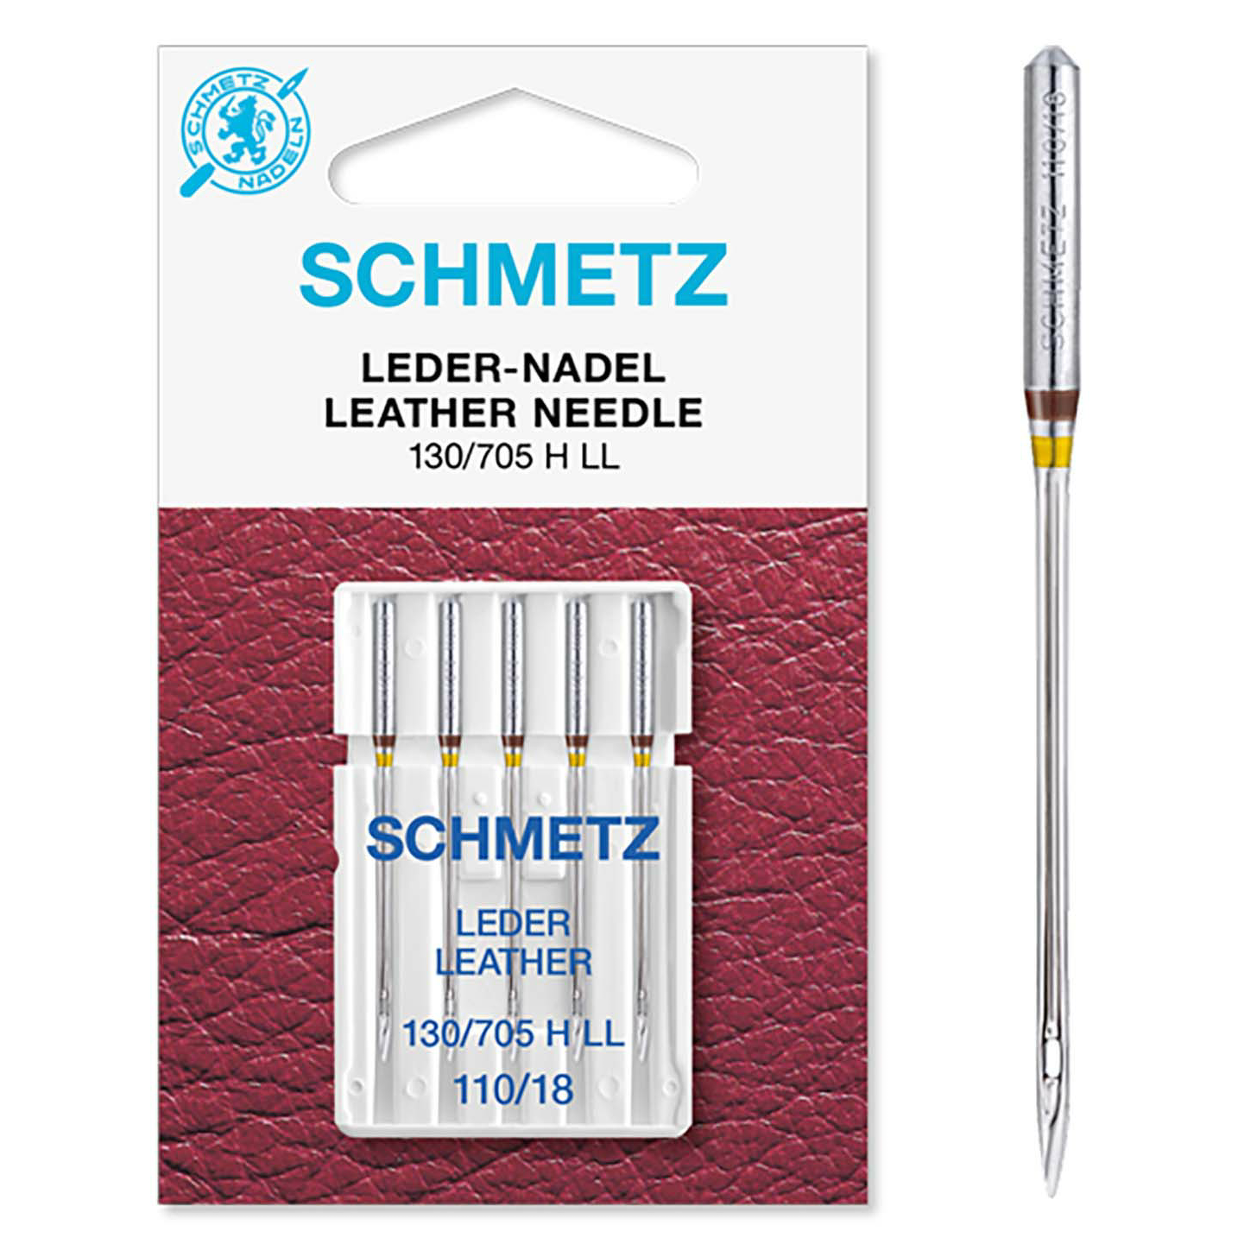 Leather sewing machine needles in UK // Needle for leather work